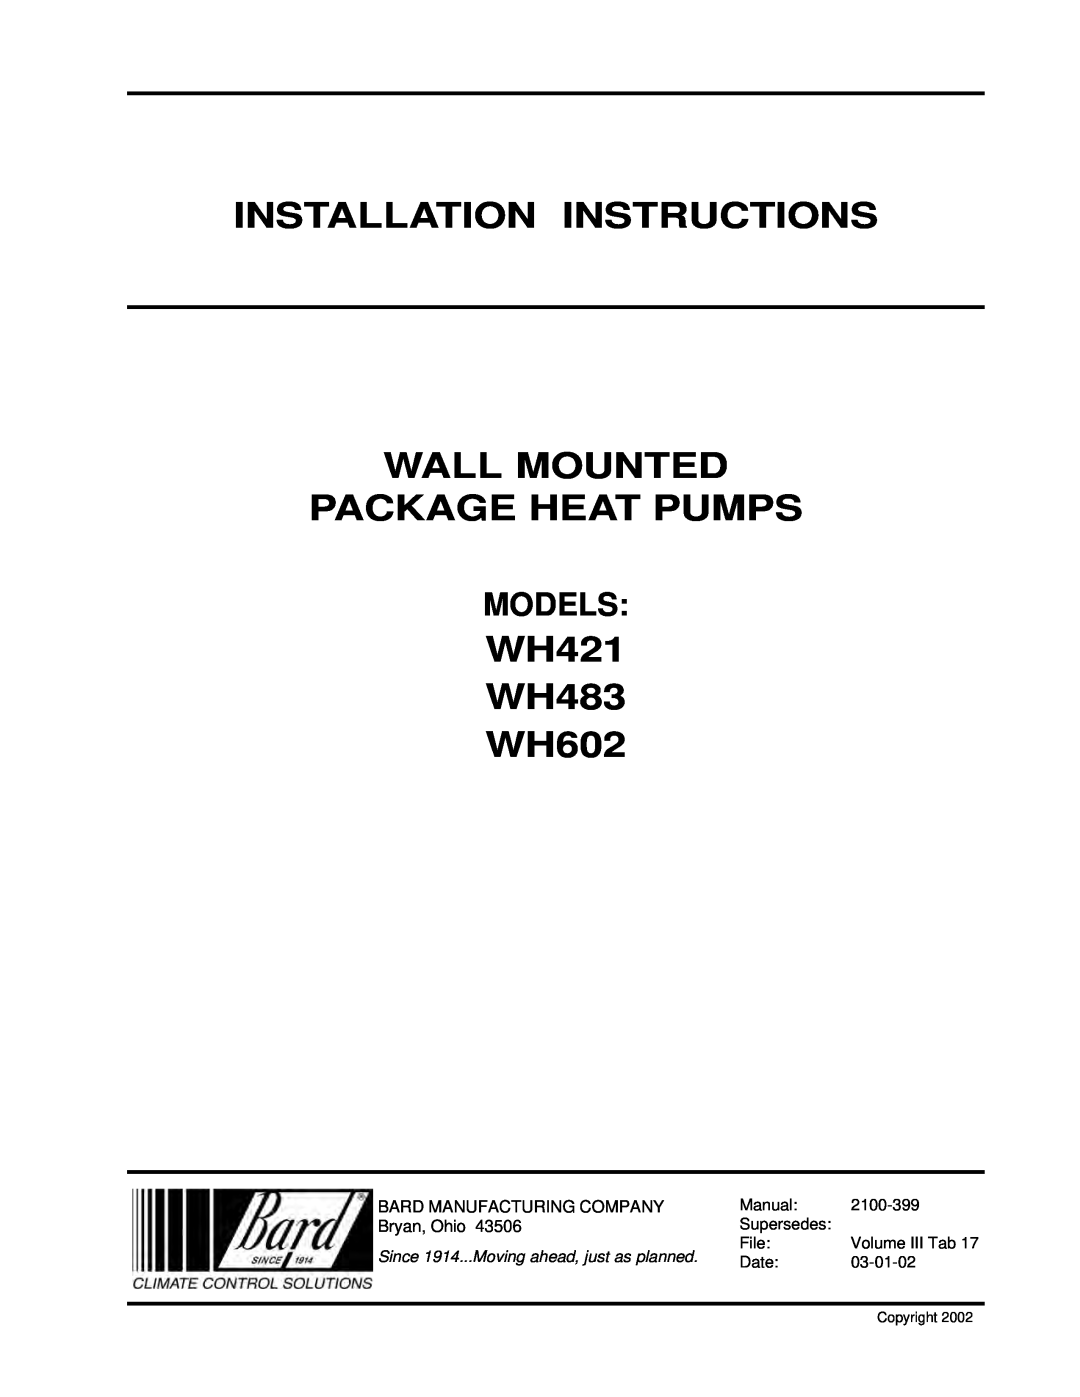 Bard installation instructions Models, Installation Instructions Wall Mounted, Package Heat Pumps, WH421 WH483 WH602 